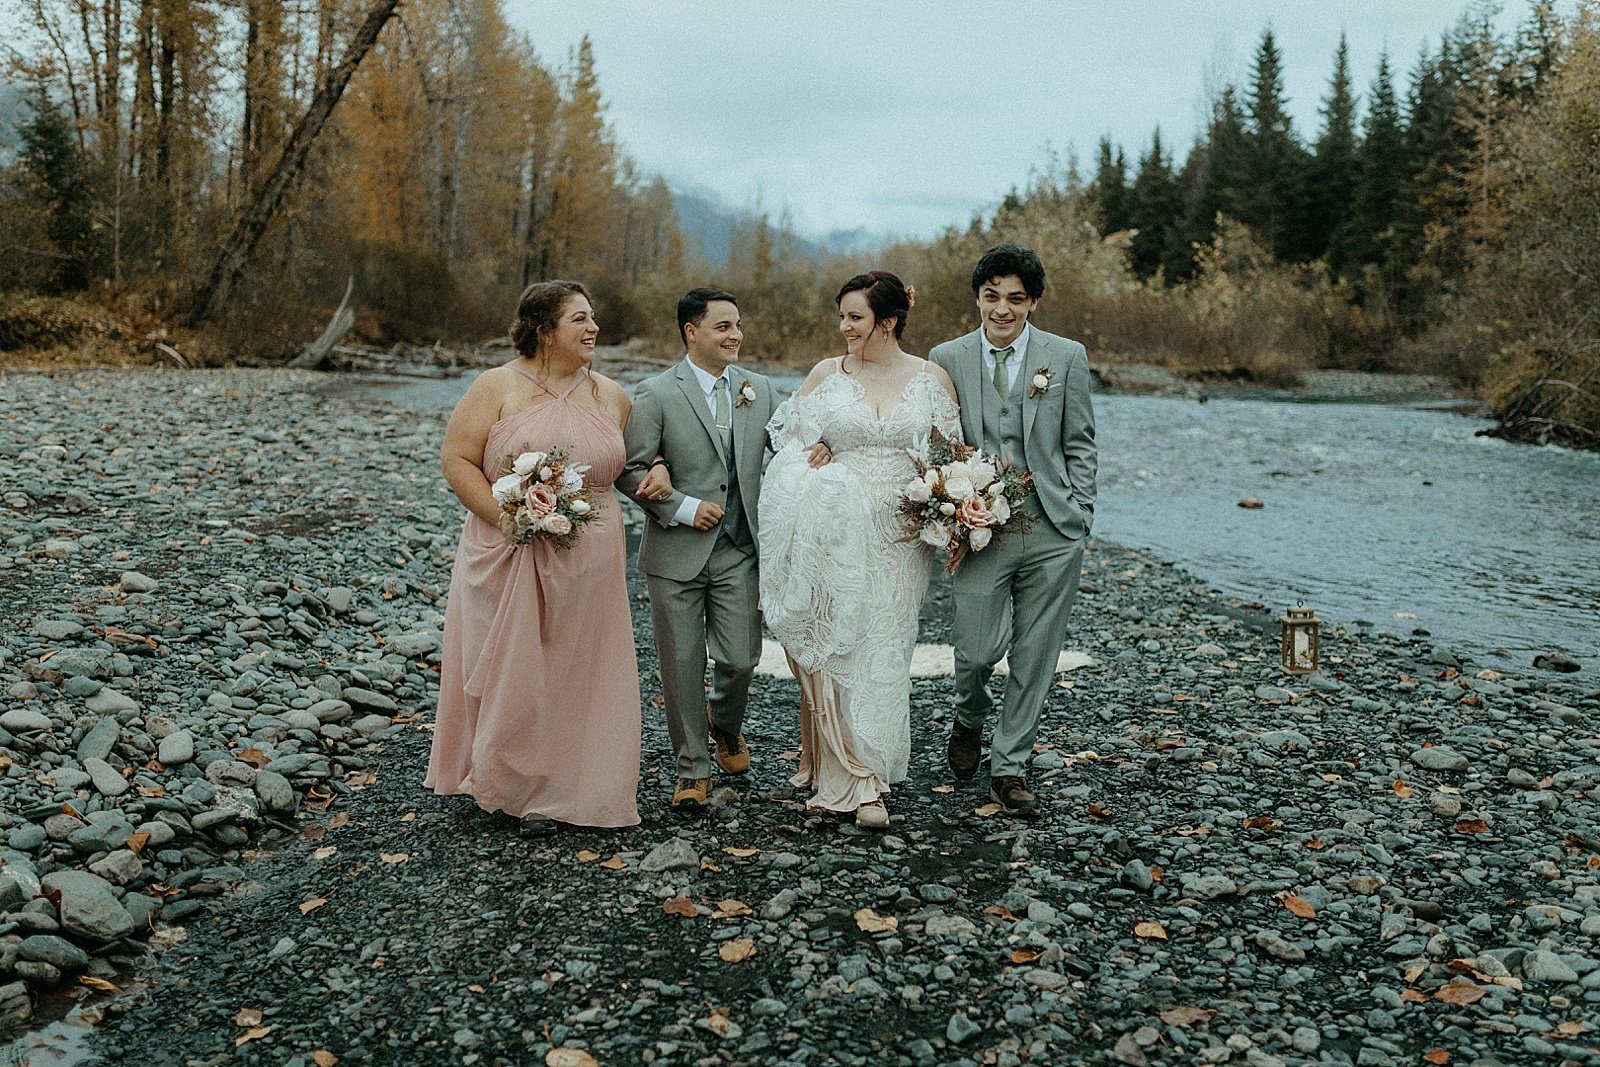  Small wedding party in gray and dusty pink on the river bank  